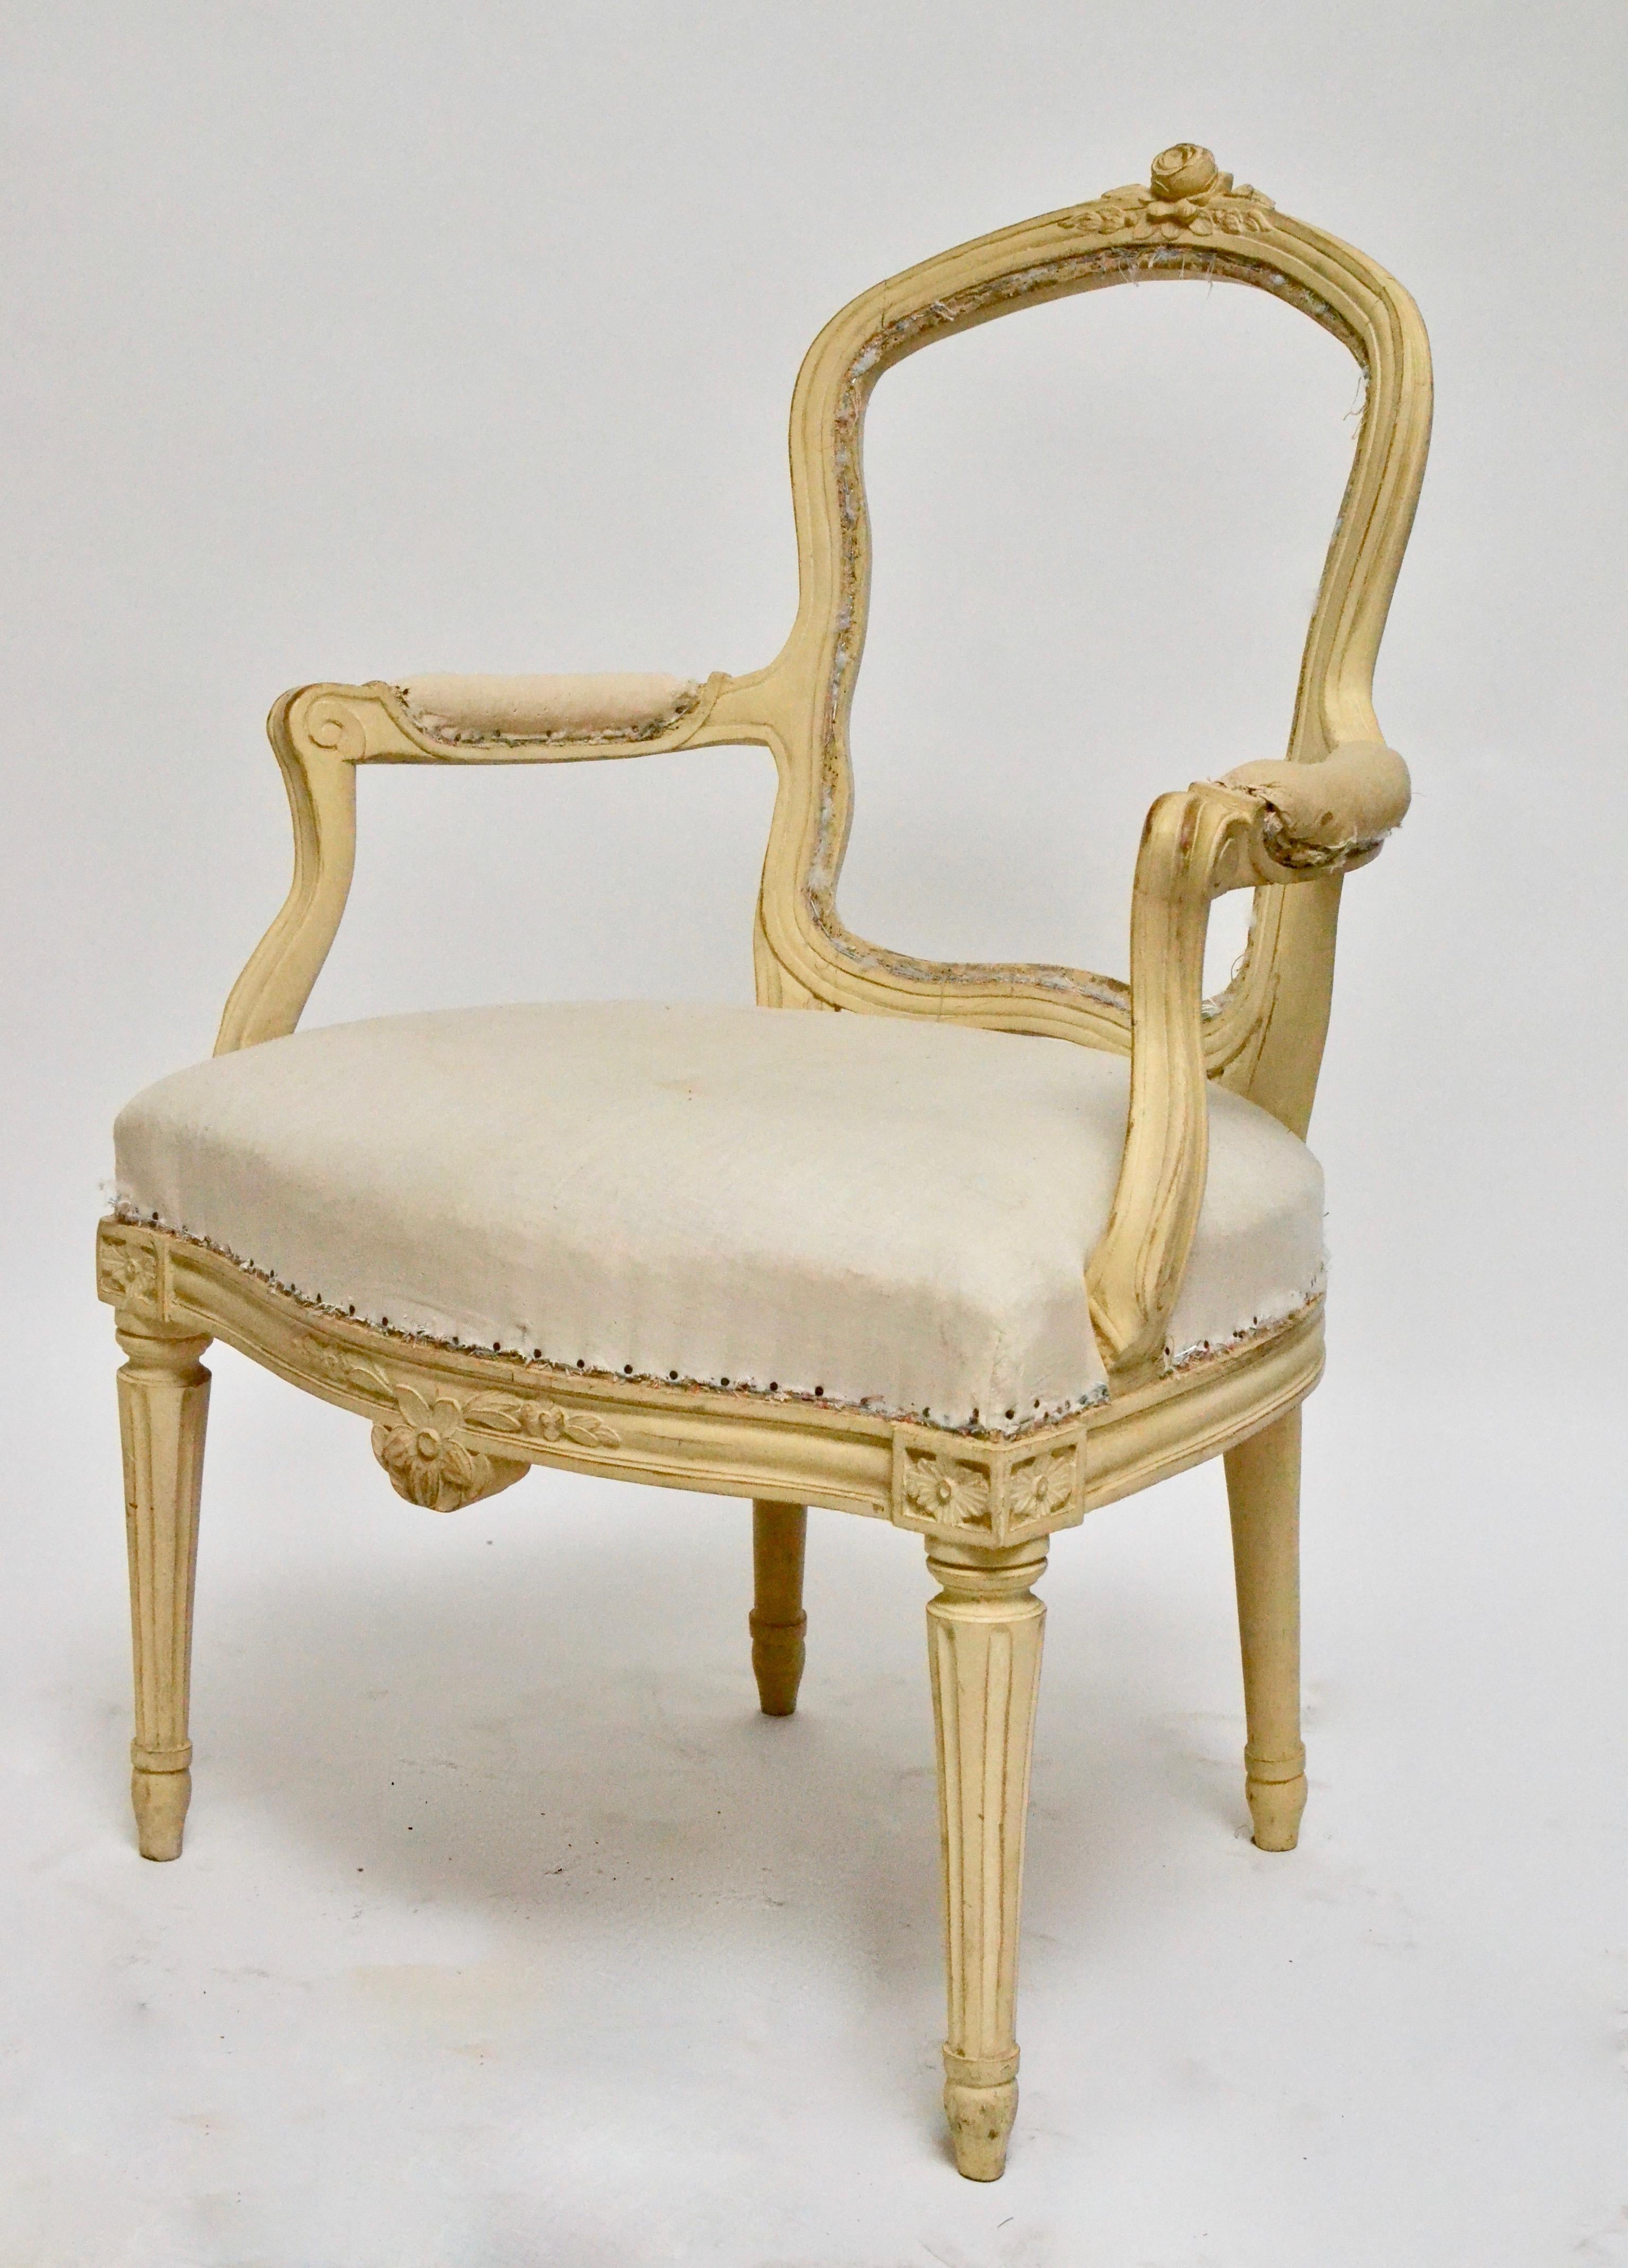 A pair of Swedish Gustavian yellow painted armchairs from the transition period. Made in Stockholm circa 1770-1780. Restored and in good condition. Needs upholstery in the back and fabric.